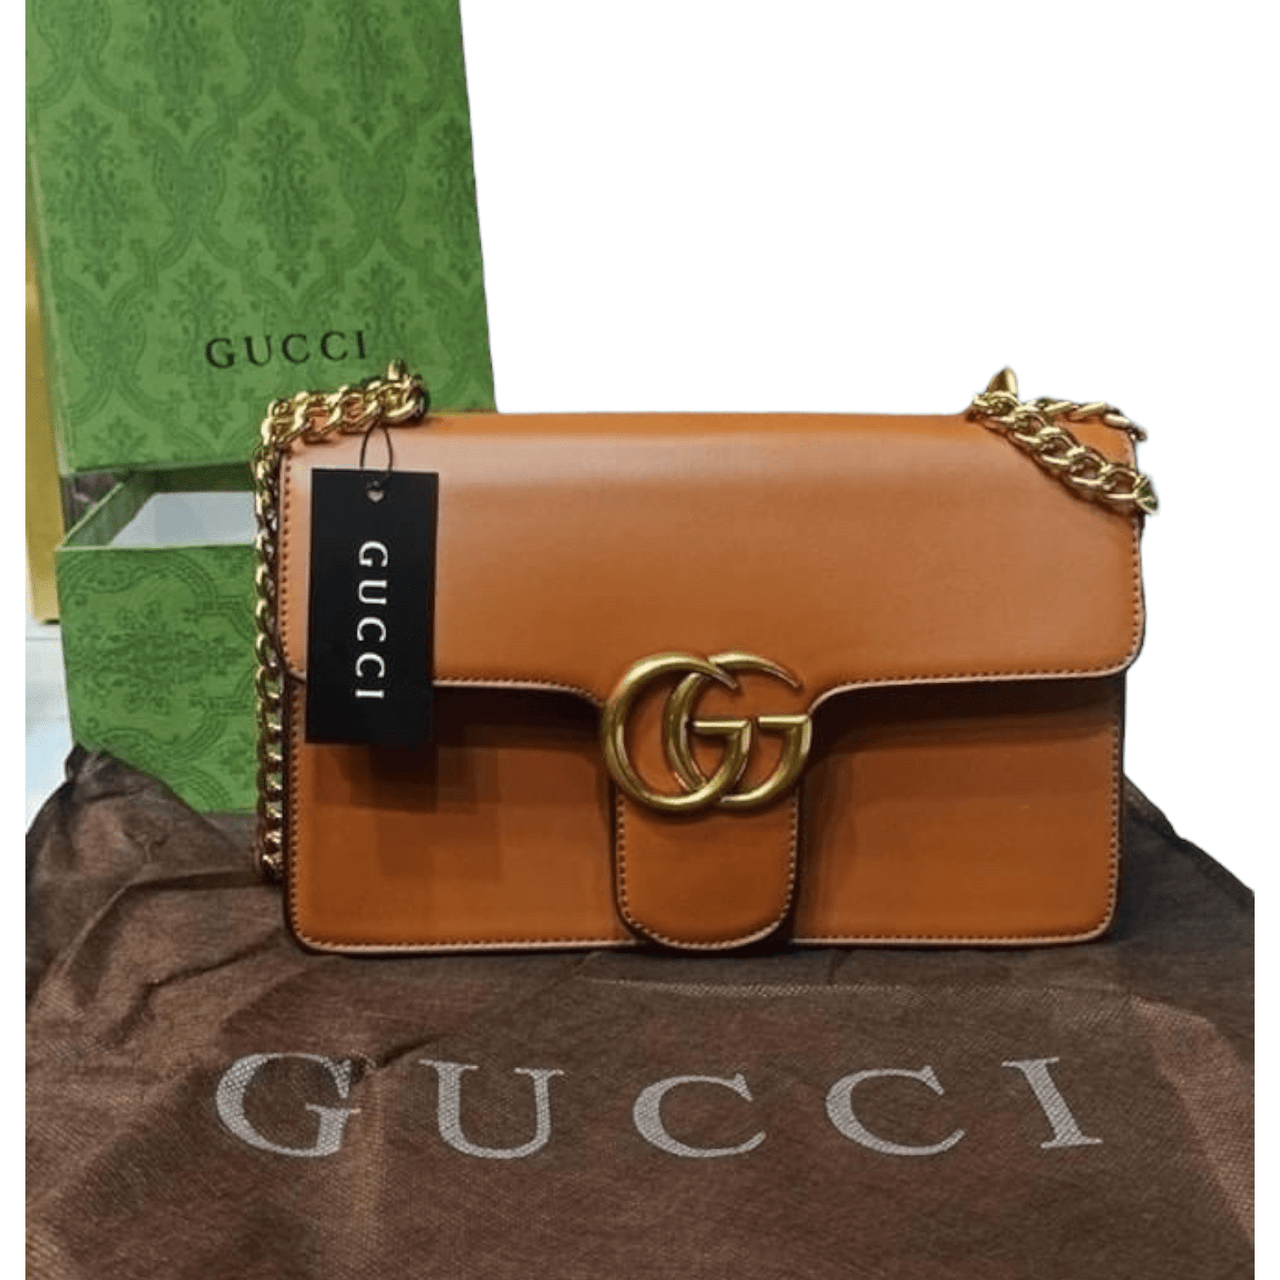 The Bag Couture Handbags, Wallets & Cases Gucci GG Marmont Chain Shoulder / Crossbody Bag Tan